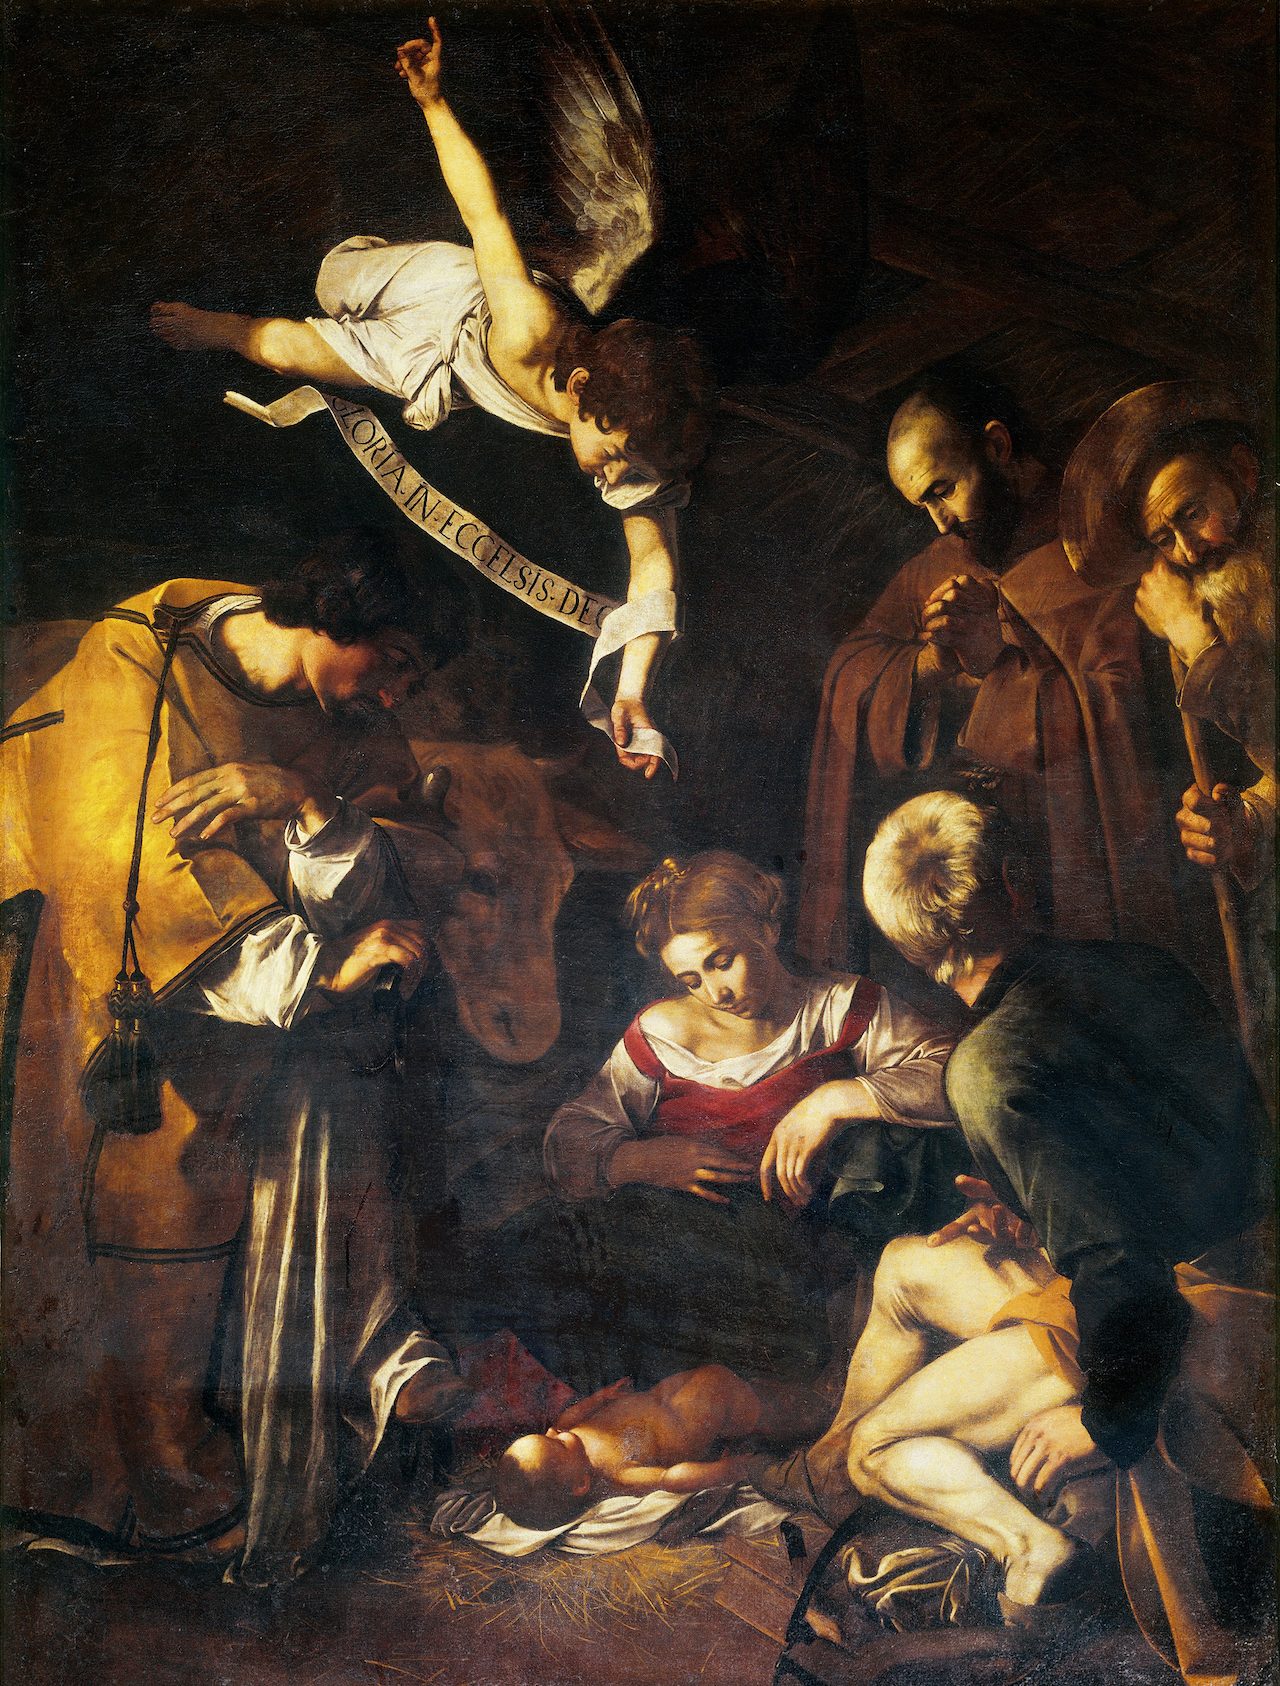 The image is a painting of the nativity scene. It depicts Mary, Joseph, and the baby Jesus lying in a manger surrounded by shepherds and angels. The shepherds are adoring the baby, while the angels are hovering above them. The scene is illuminated by a bright light shining from above. The painting is done in a realistic style with attention to detail in the clothing and facial expressions of the figures. The colors used are muted and earthy, giving the scene a warm and cozy feel. The overall effect is one of peace and serenity.